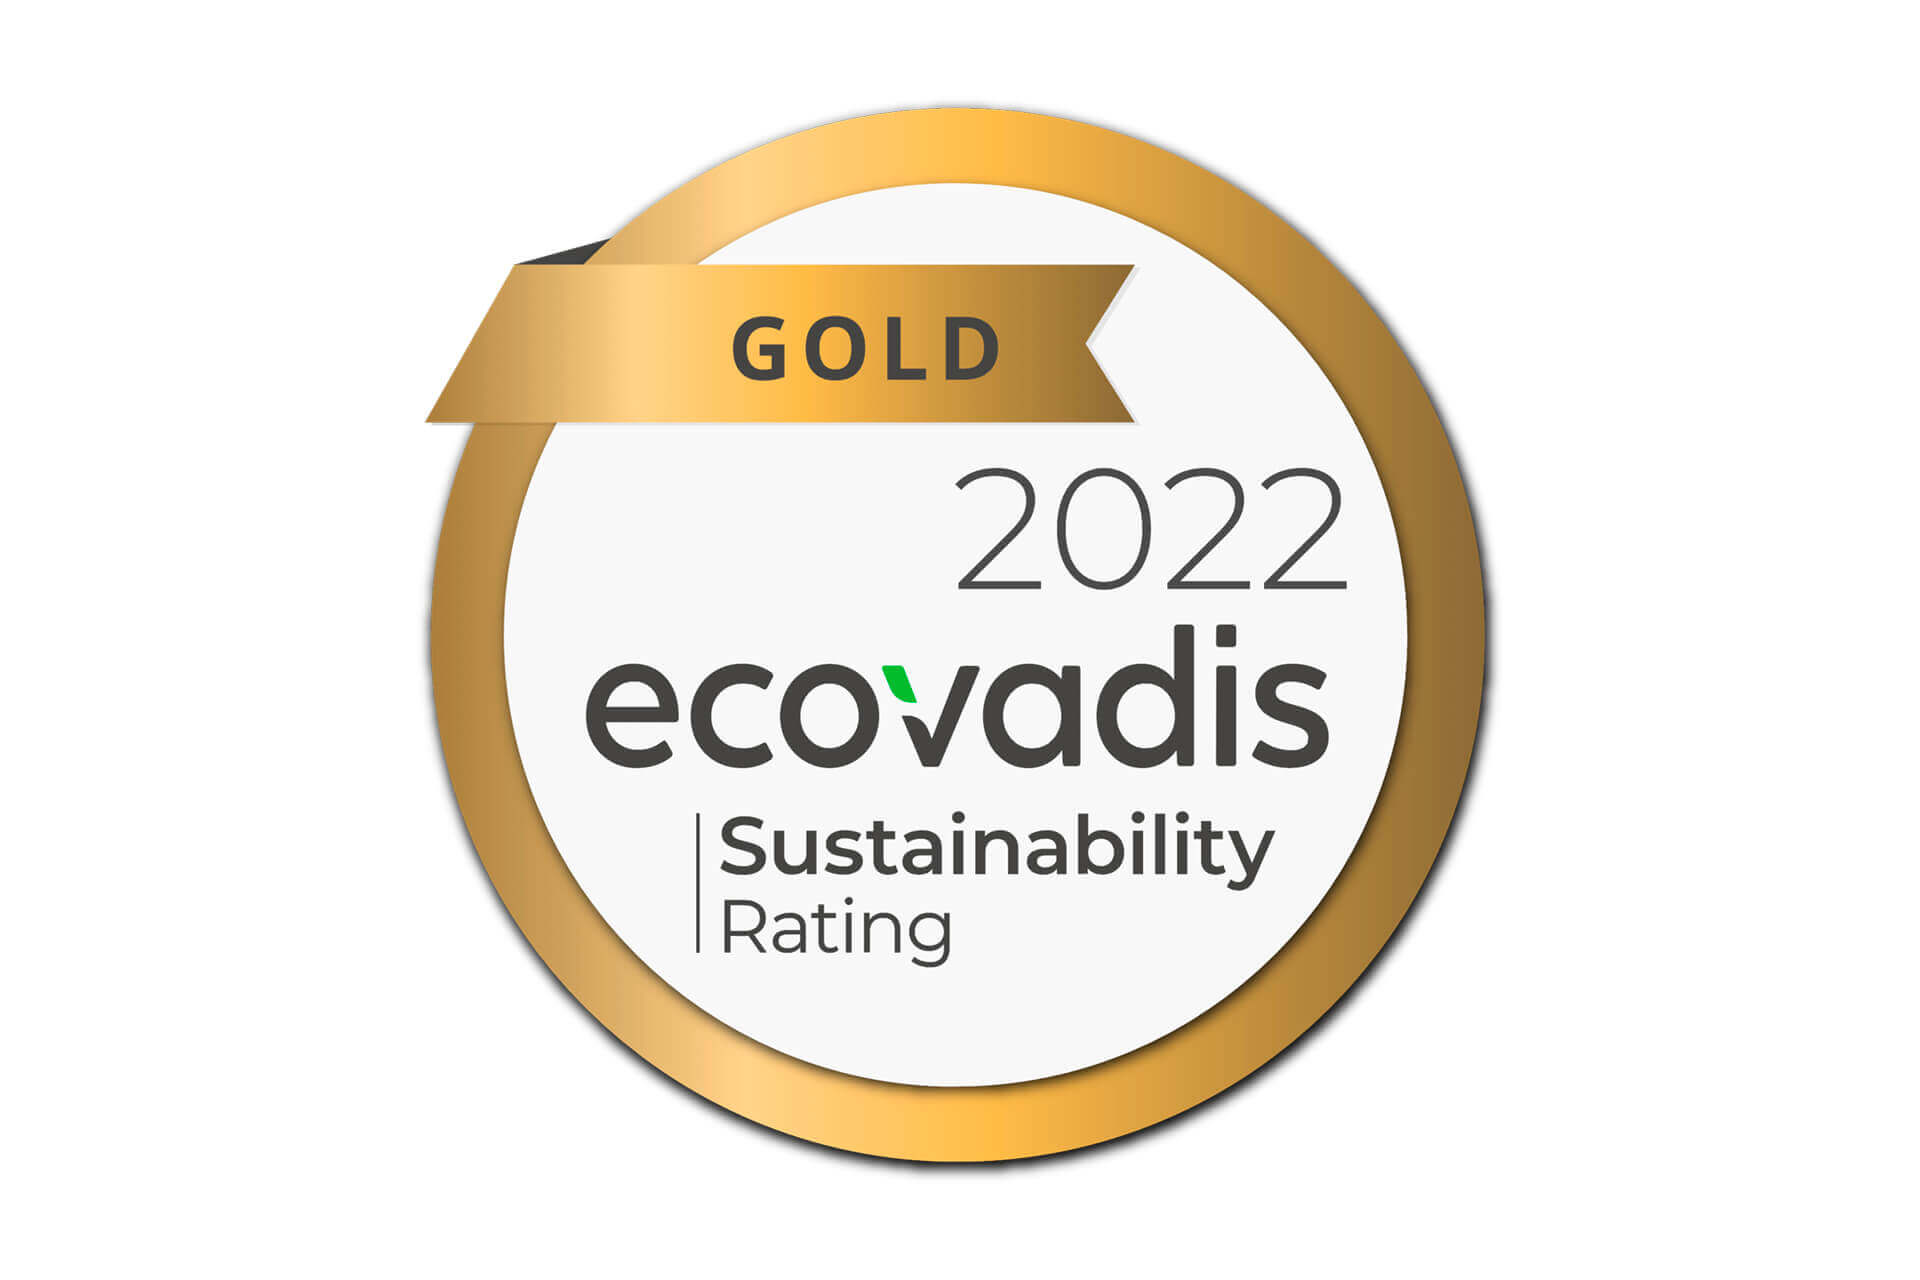 With the Ecovadis Gold Rating 2022 Schreiner Group once again proves its comprehensive sustainability goals and measures. Additional info at: www.schreiner-group.com/en/company/sustainability/